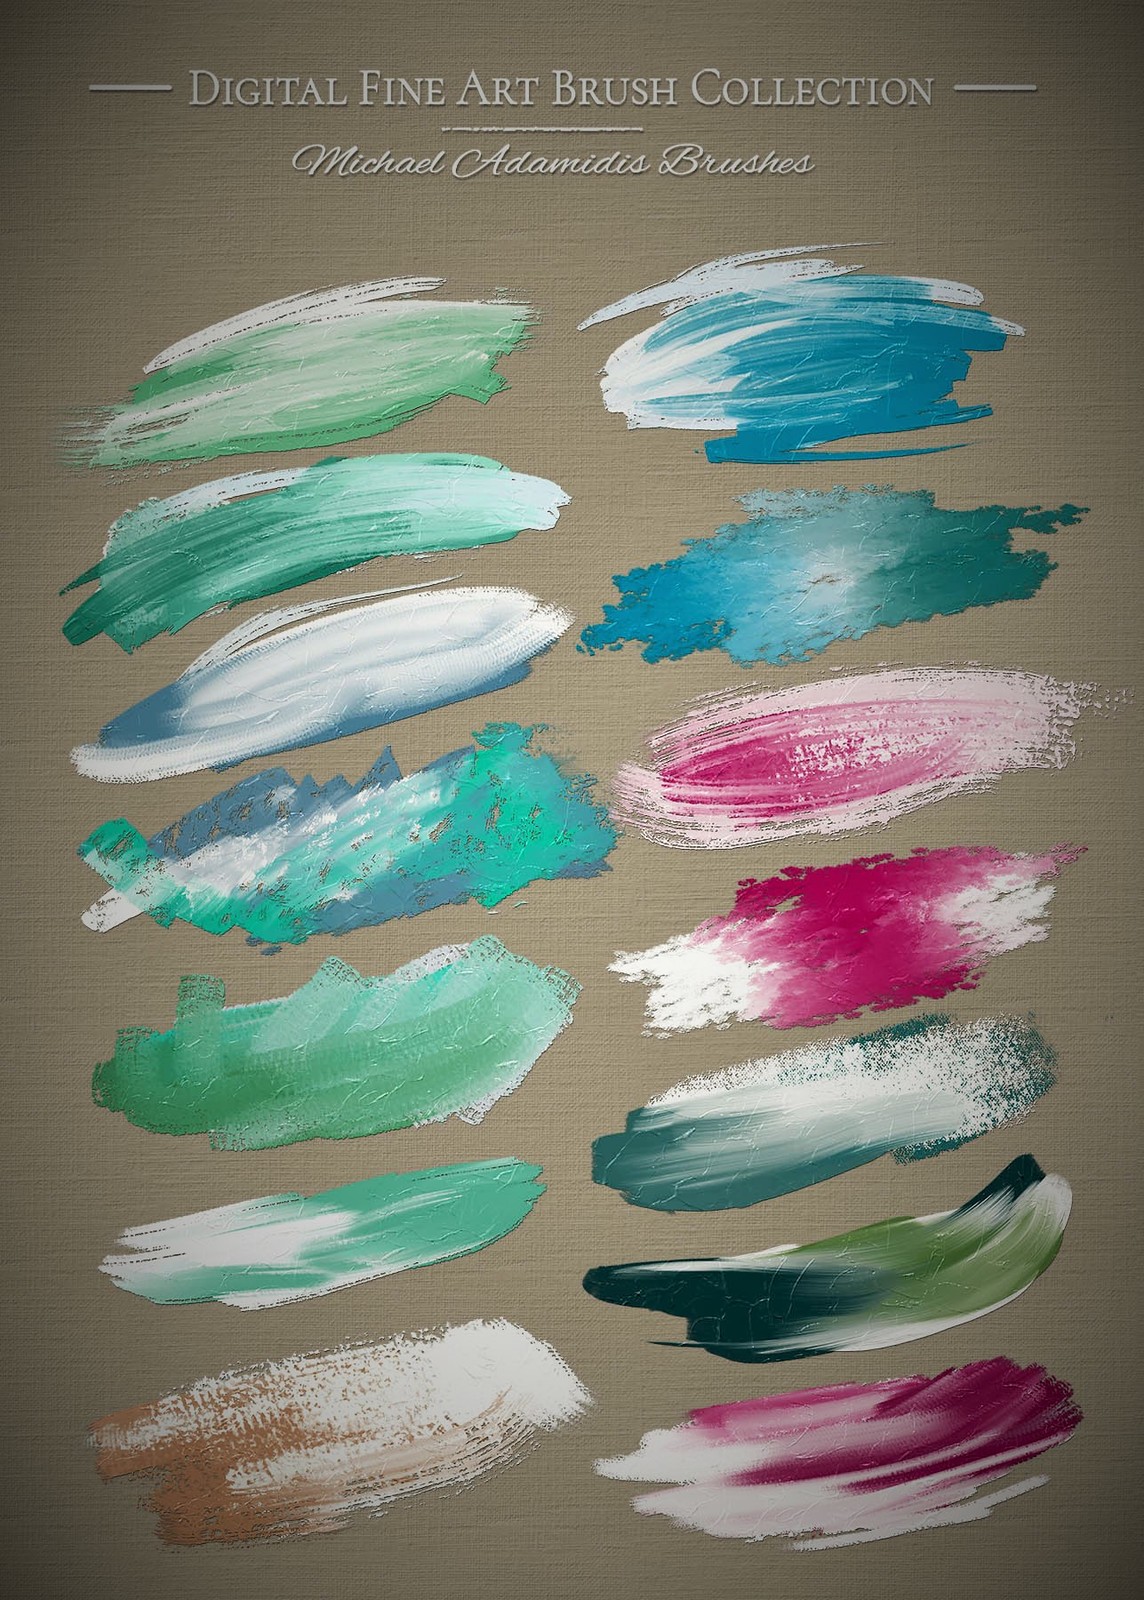 A glimpse of Brush Strokes example